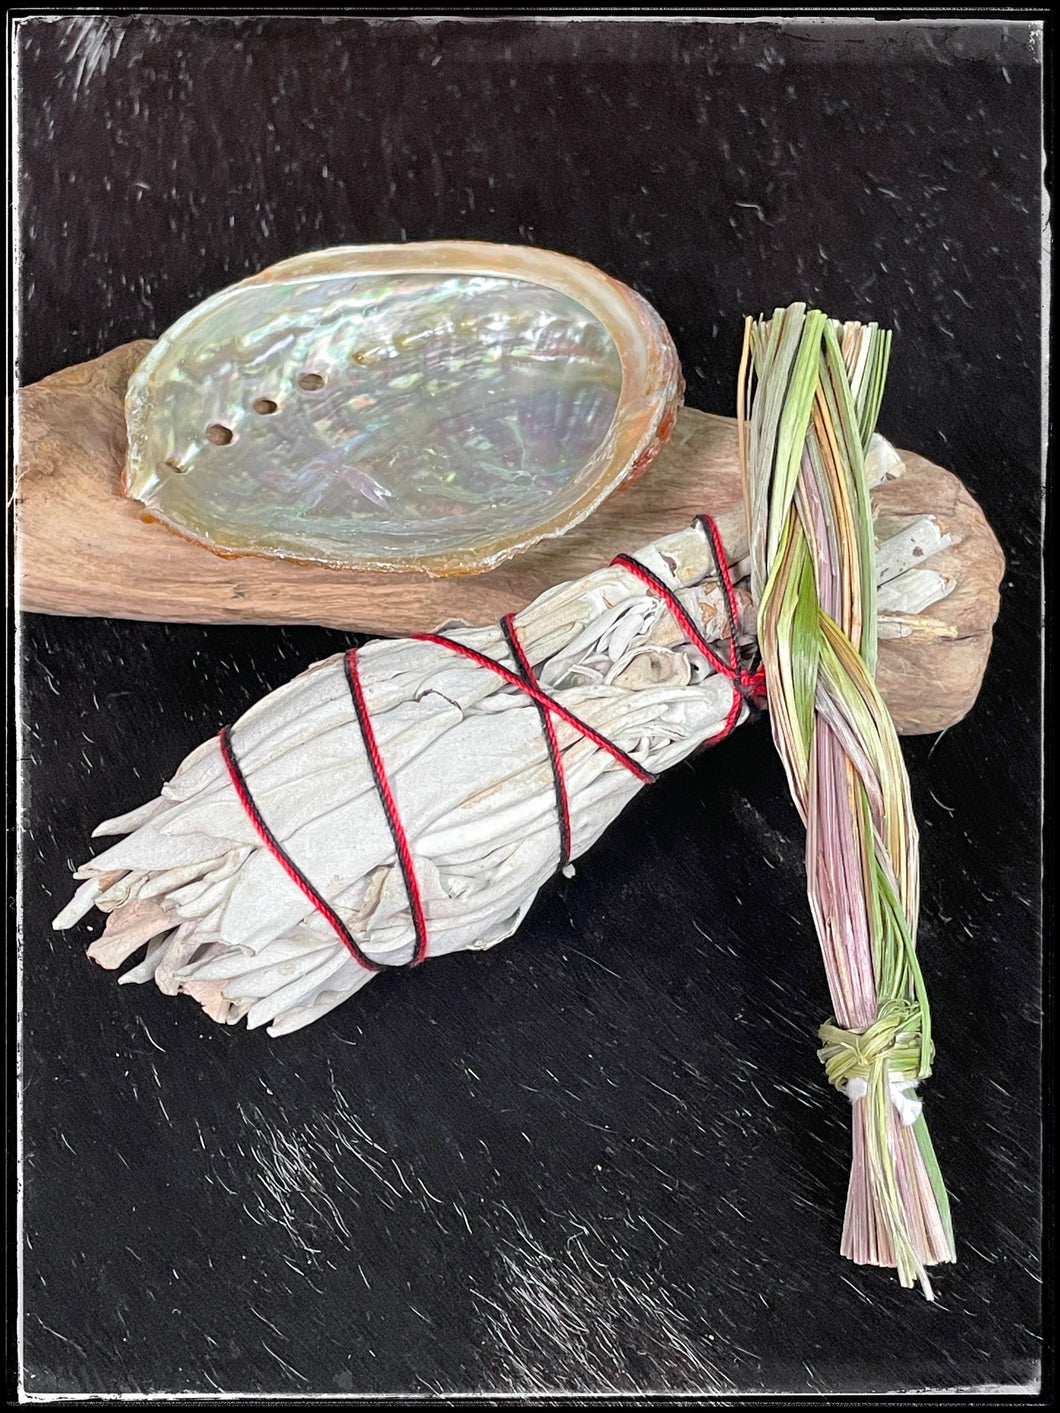 White sage, sweetgrass, and miniature abalone shell smudging kit 